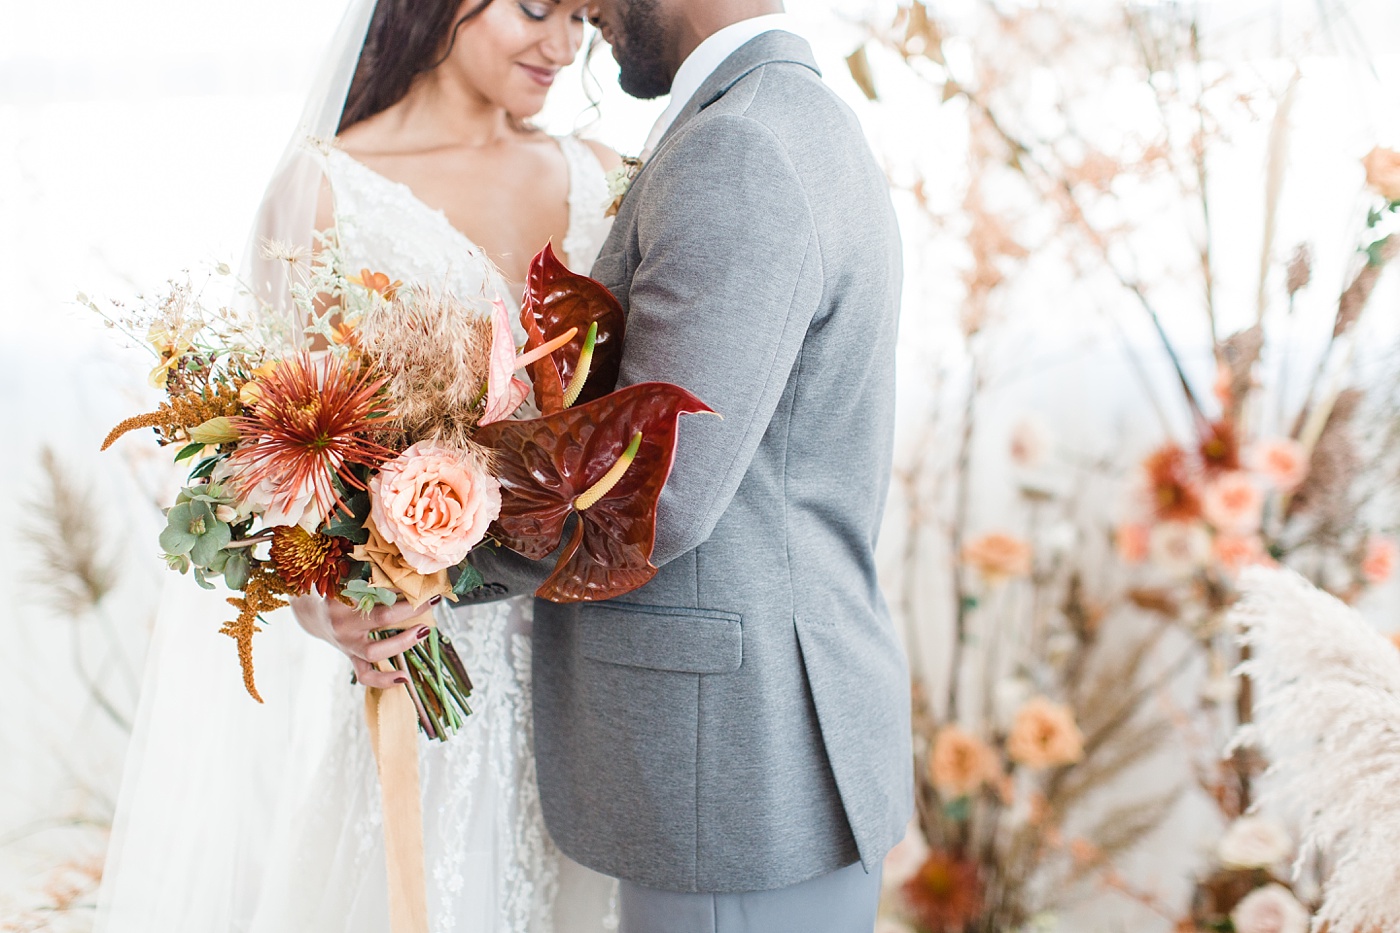 Jaylin-Pallas-Couture-Wedding-Gown-Fall-Inspiration-Photo-Jessica-Haley-Bridal